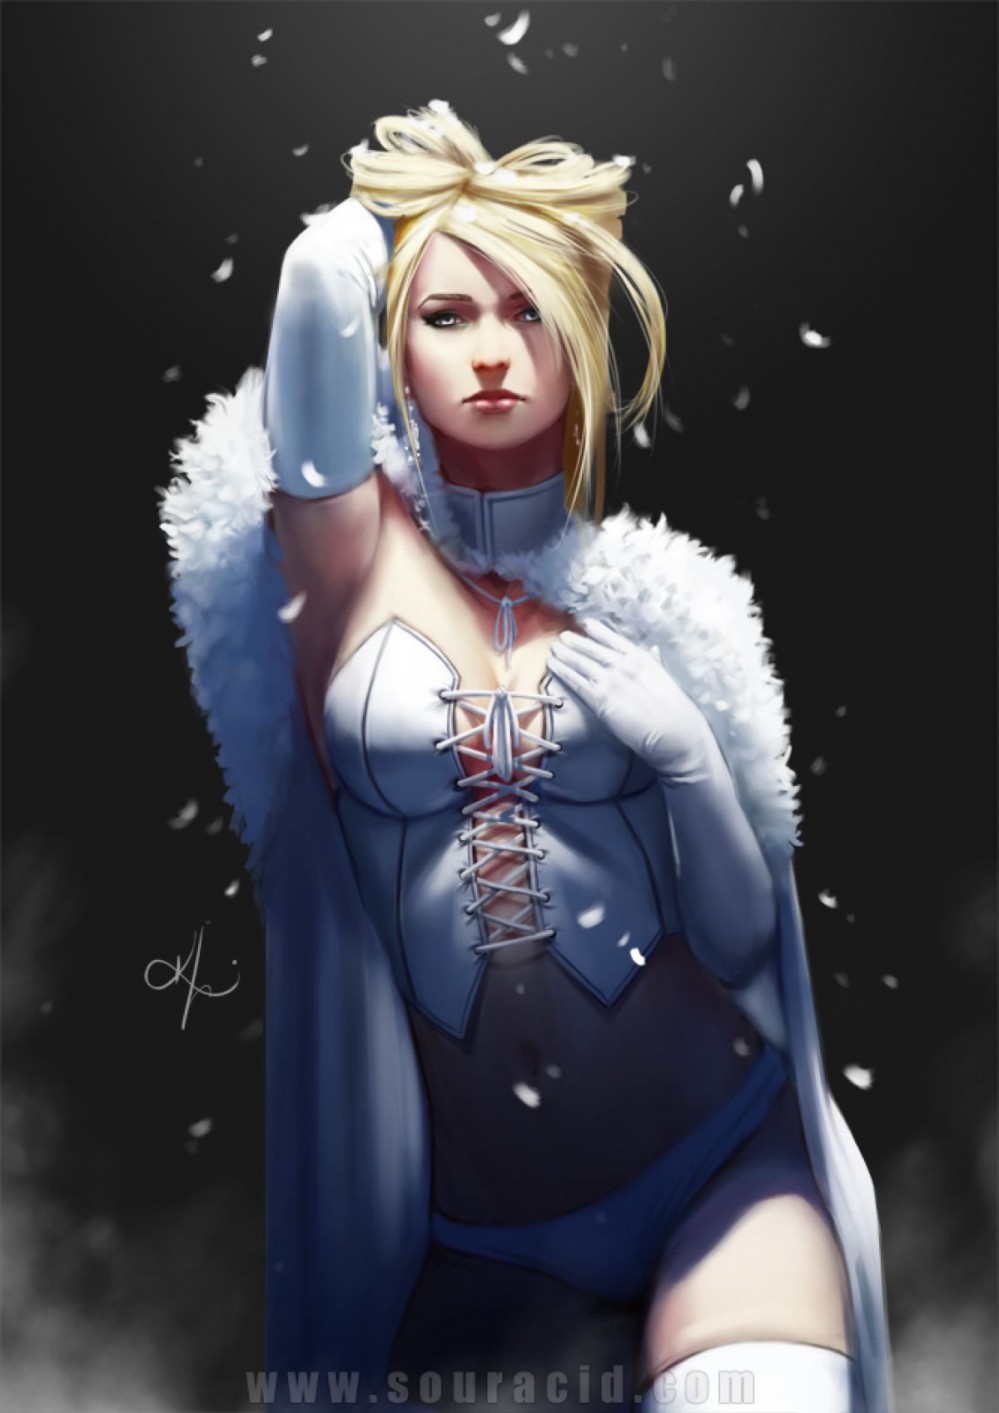 emma_frost_by_souracid-d8fgv2h